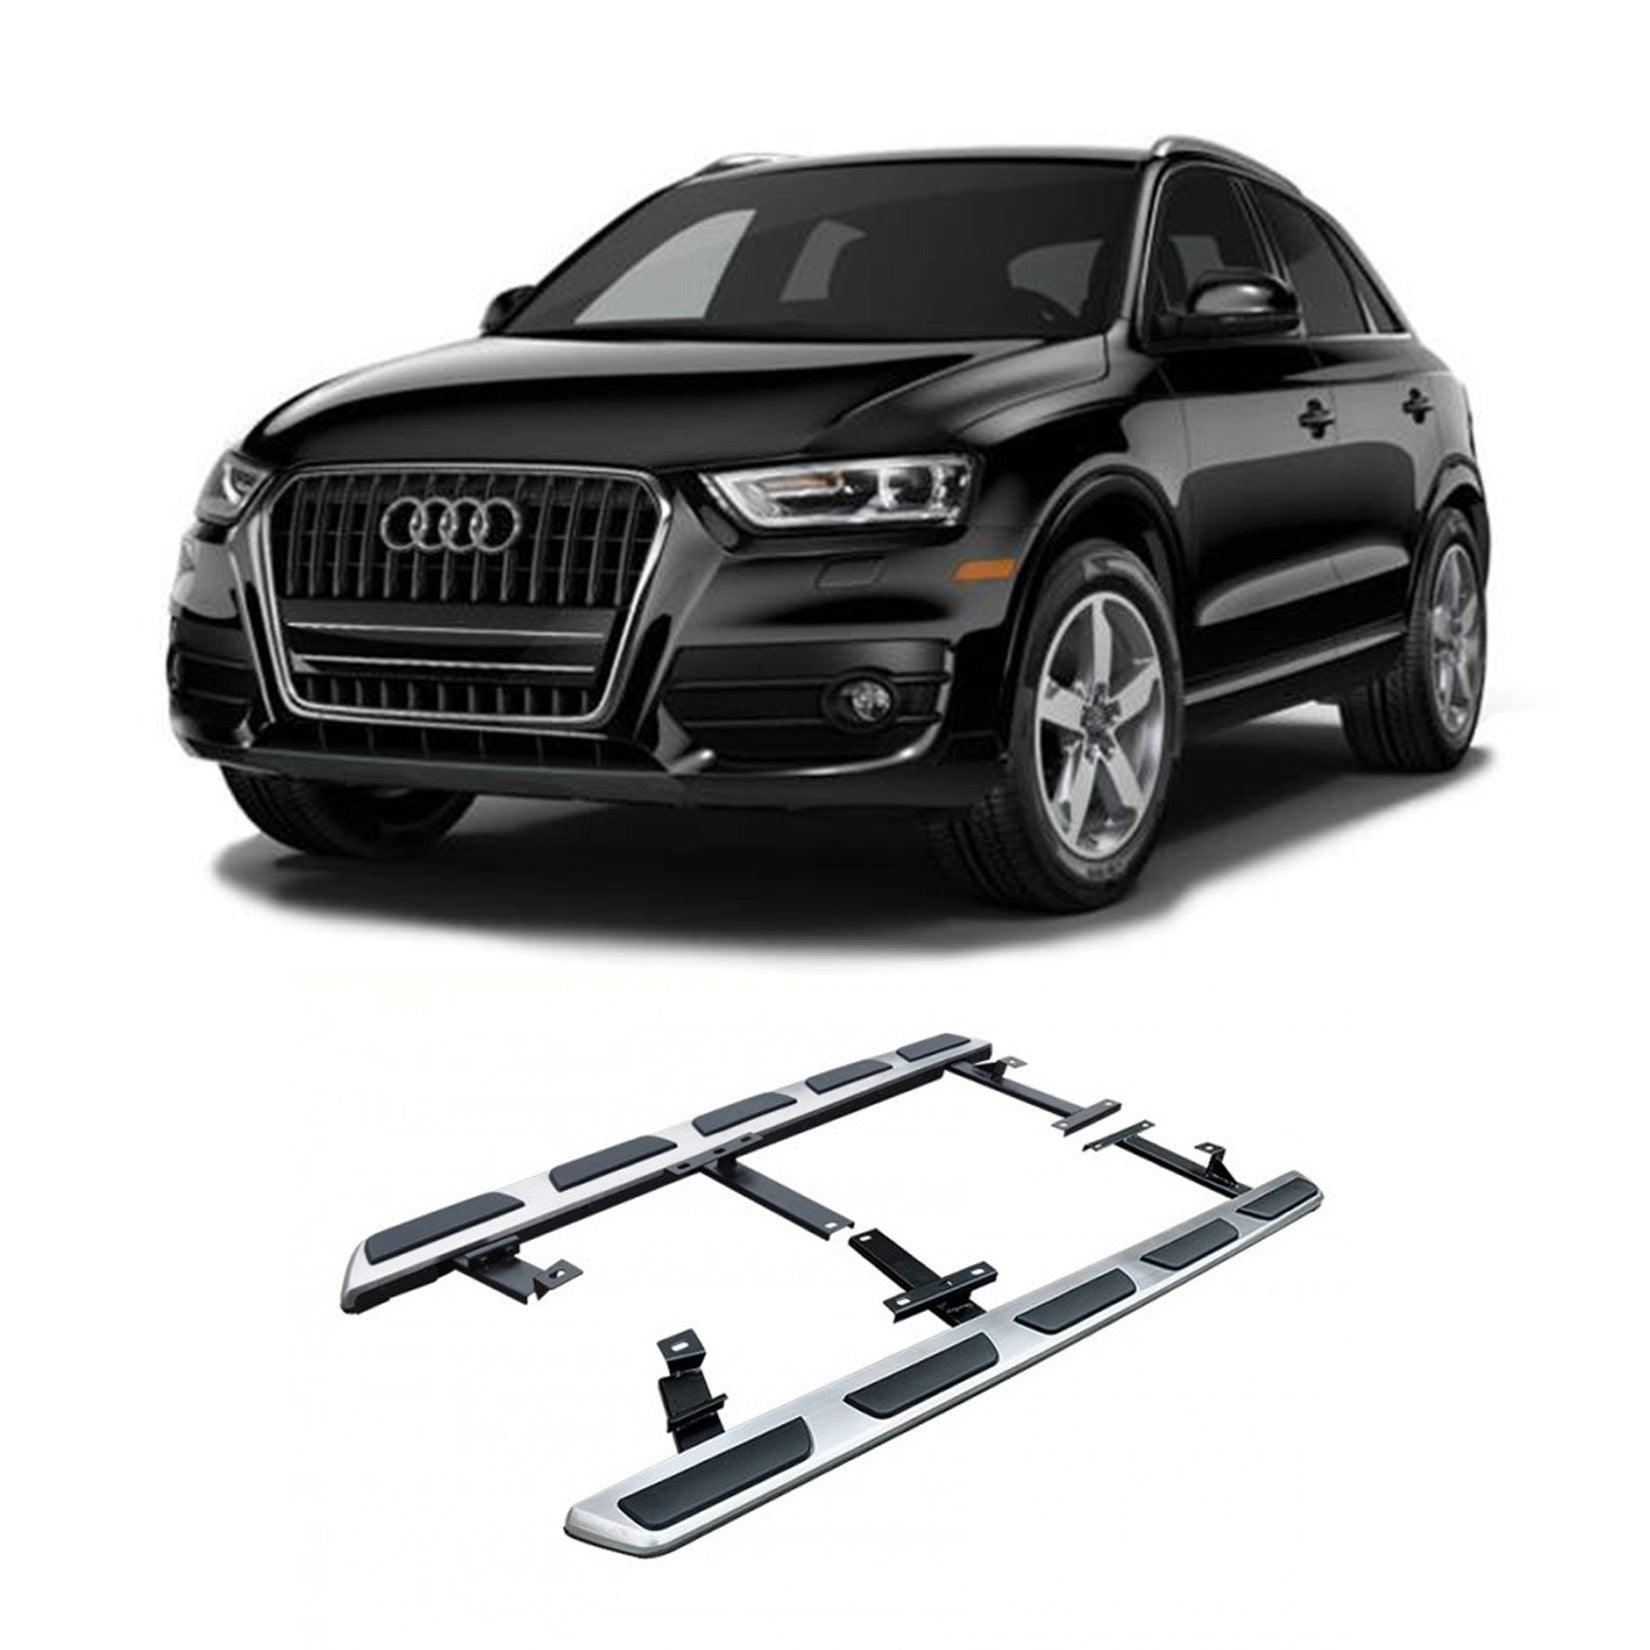 AUDI Q3 2011-2018 - OEM STYLE RUNNING BOARDS - SIDE STEPS - PAIR - Storm Xccessories2